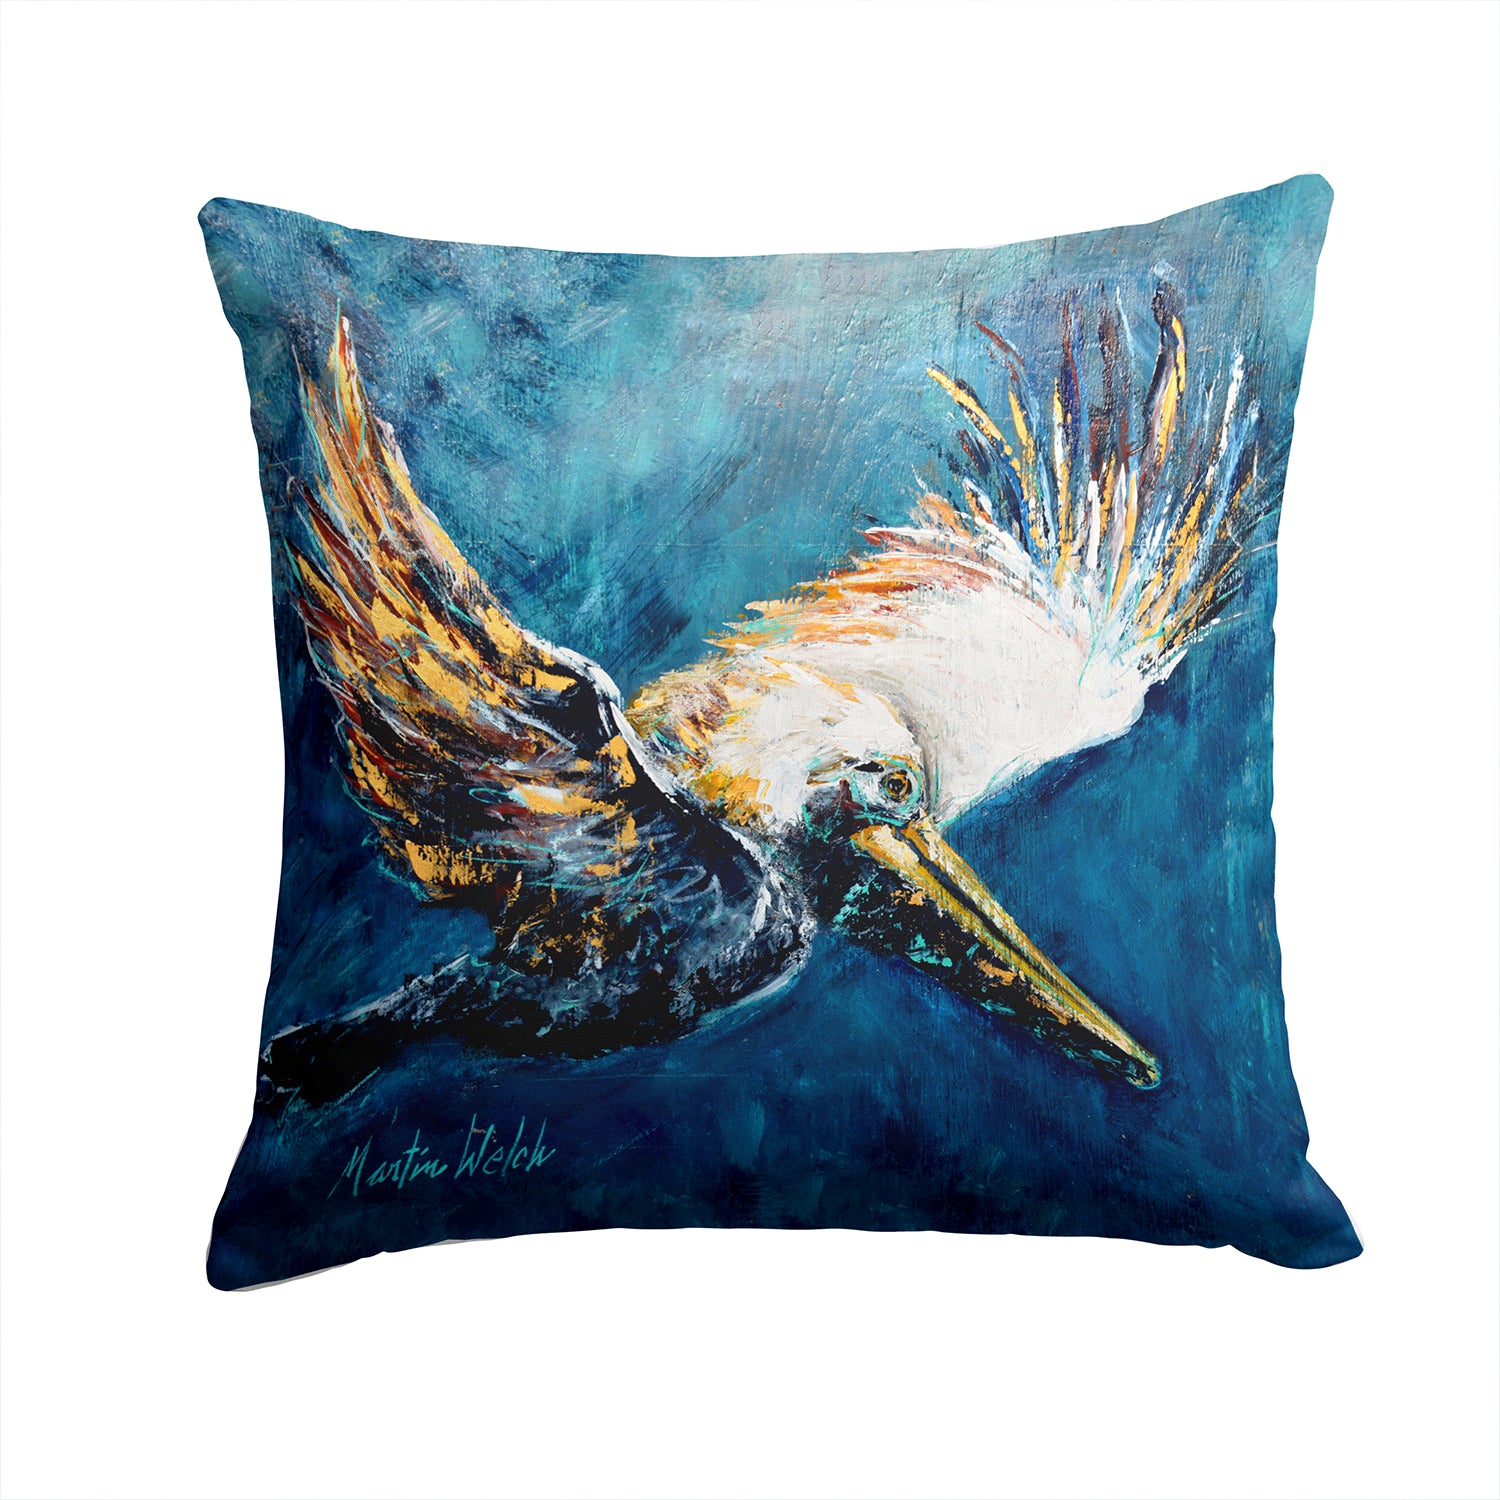 Buy this Pelican Go For It Fabric Decorative Pillow